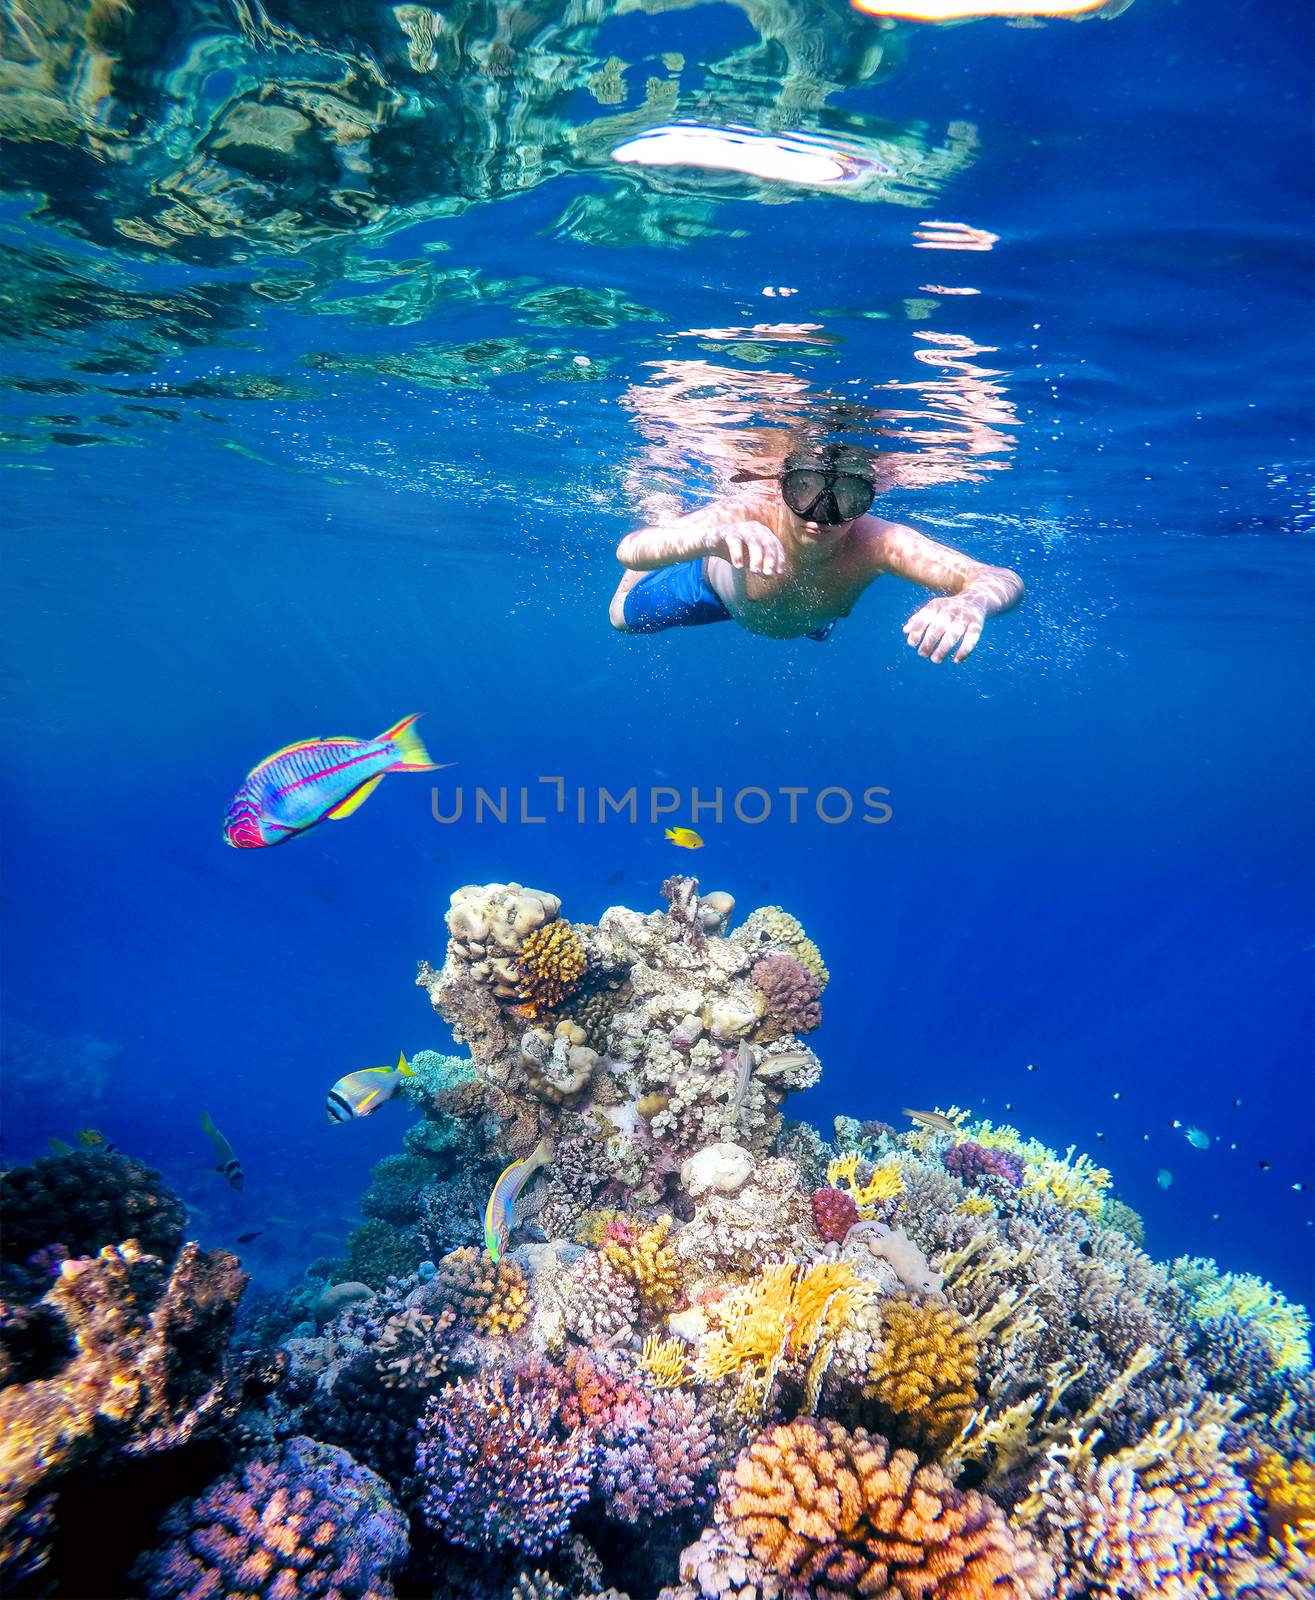 Underwater shoot of a young boy snorkeling in red sea by artush